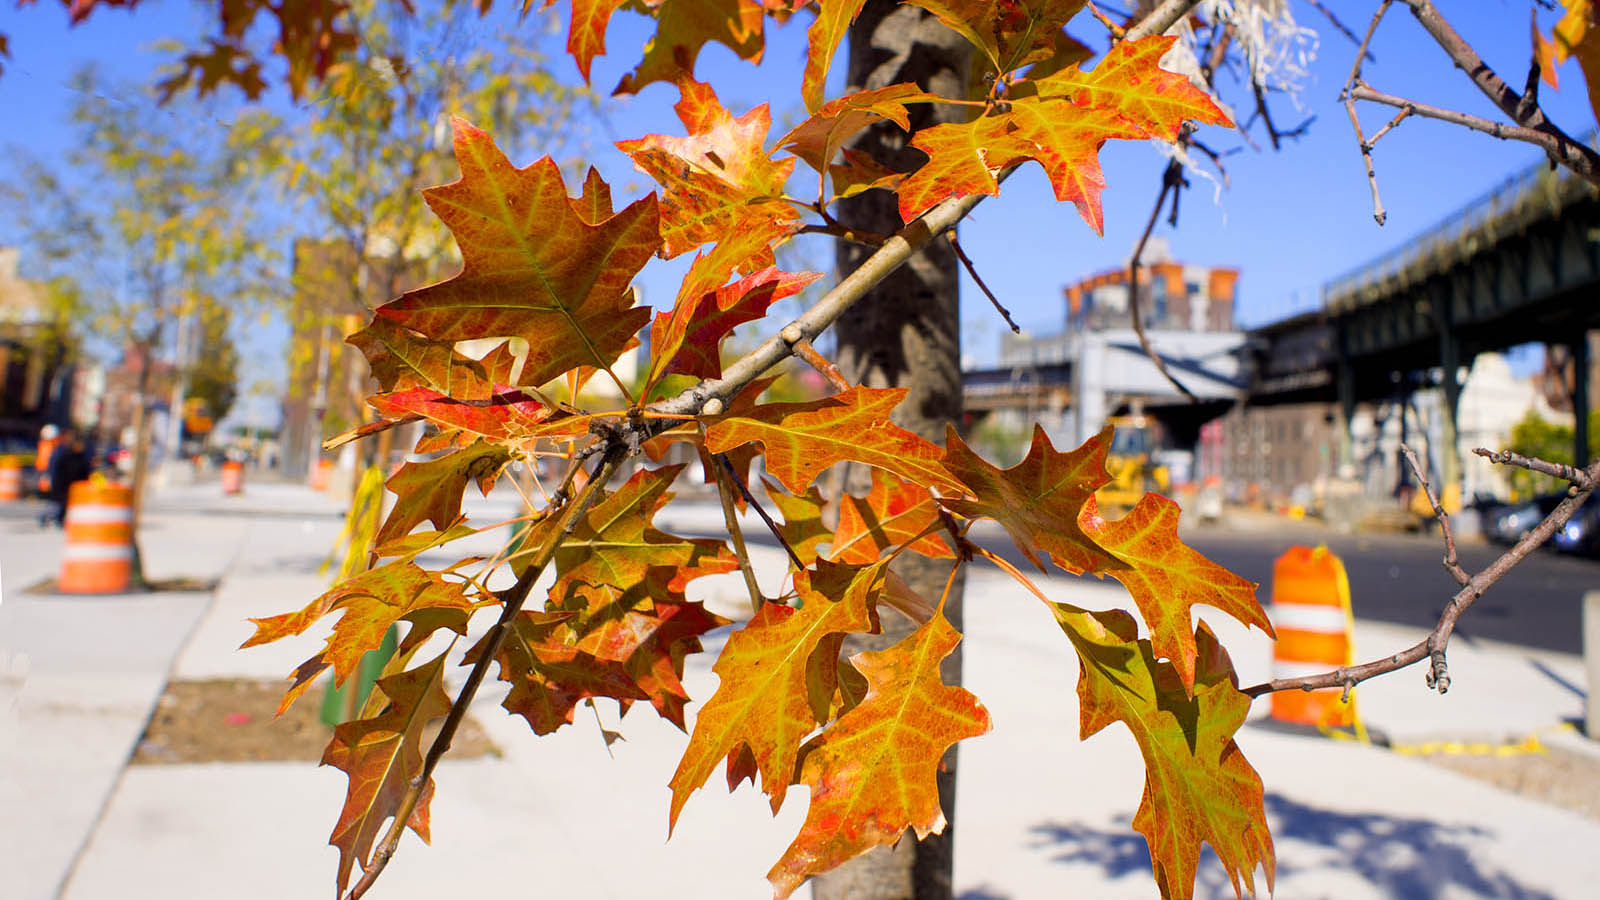 Autumn comes to the bus plaza in Williamsburg